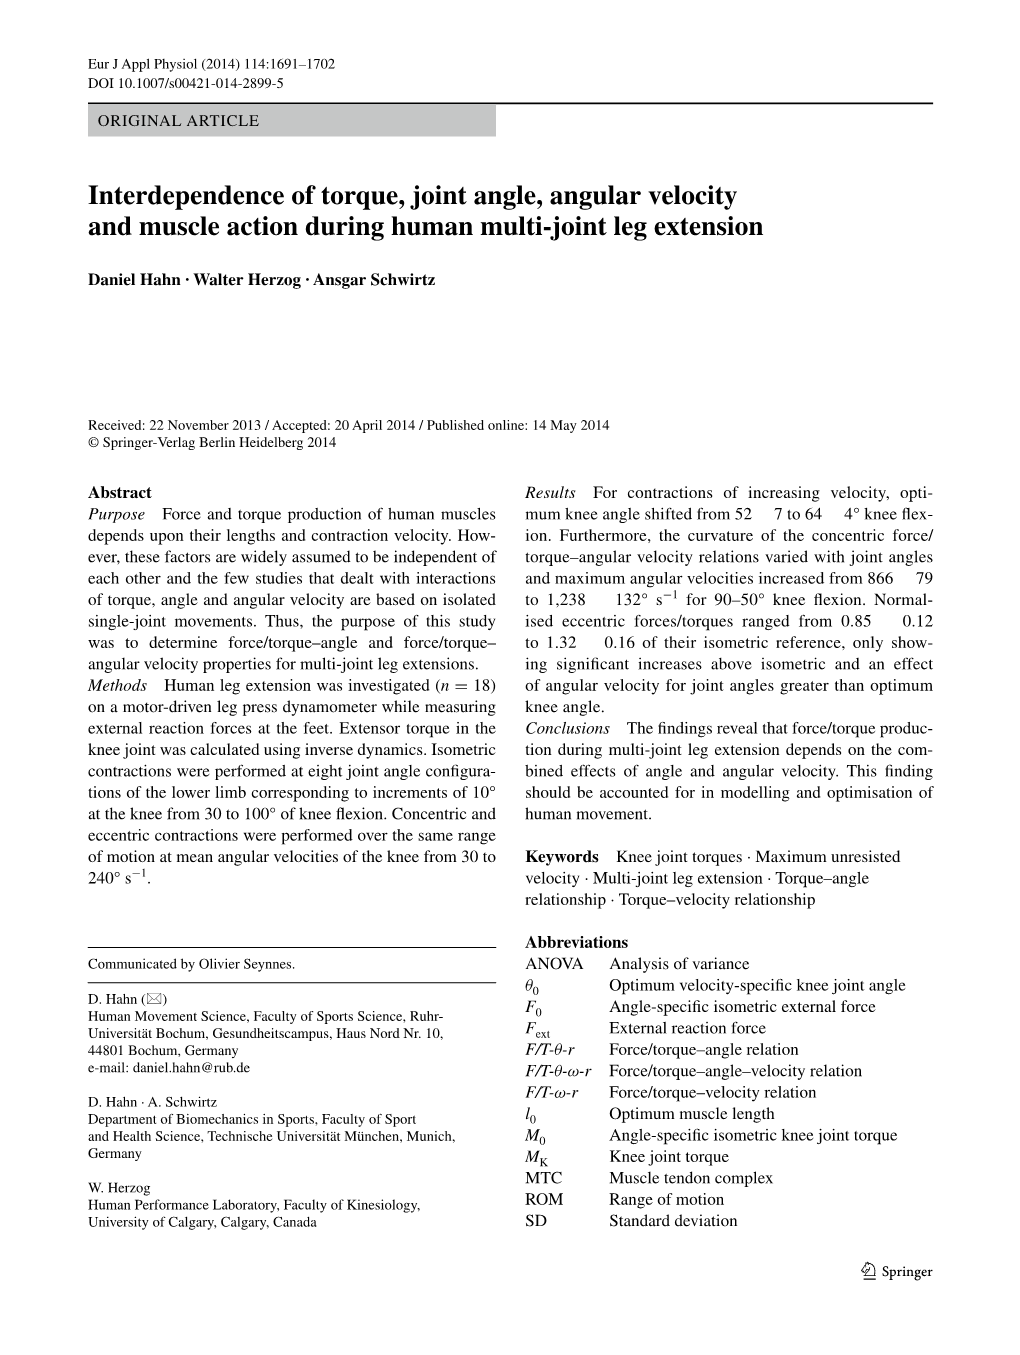 Interdependence of Torque, Joint Angle, Angular Velocity and Muscle Action During Human Multi-Joint Leg Extension